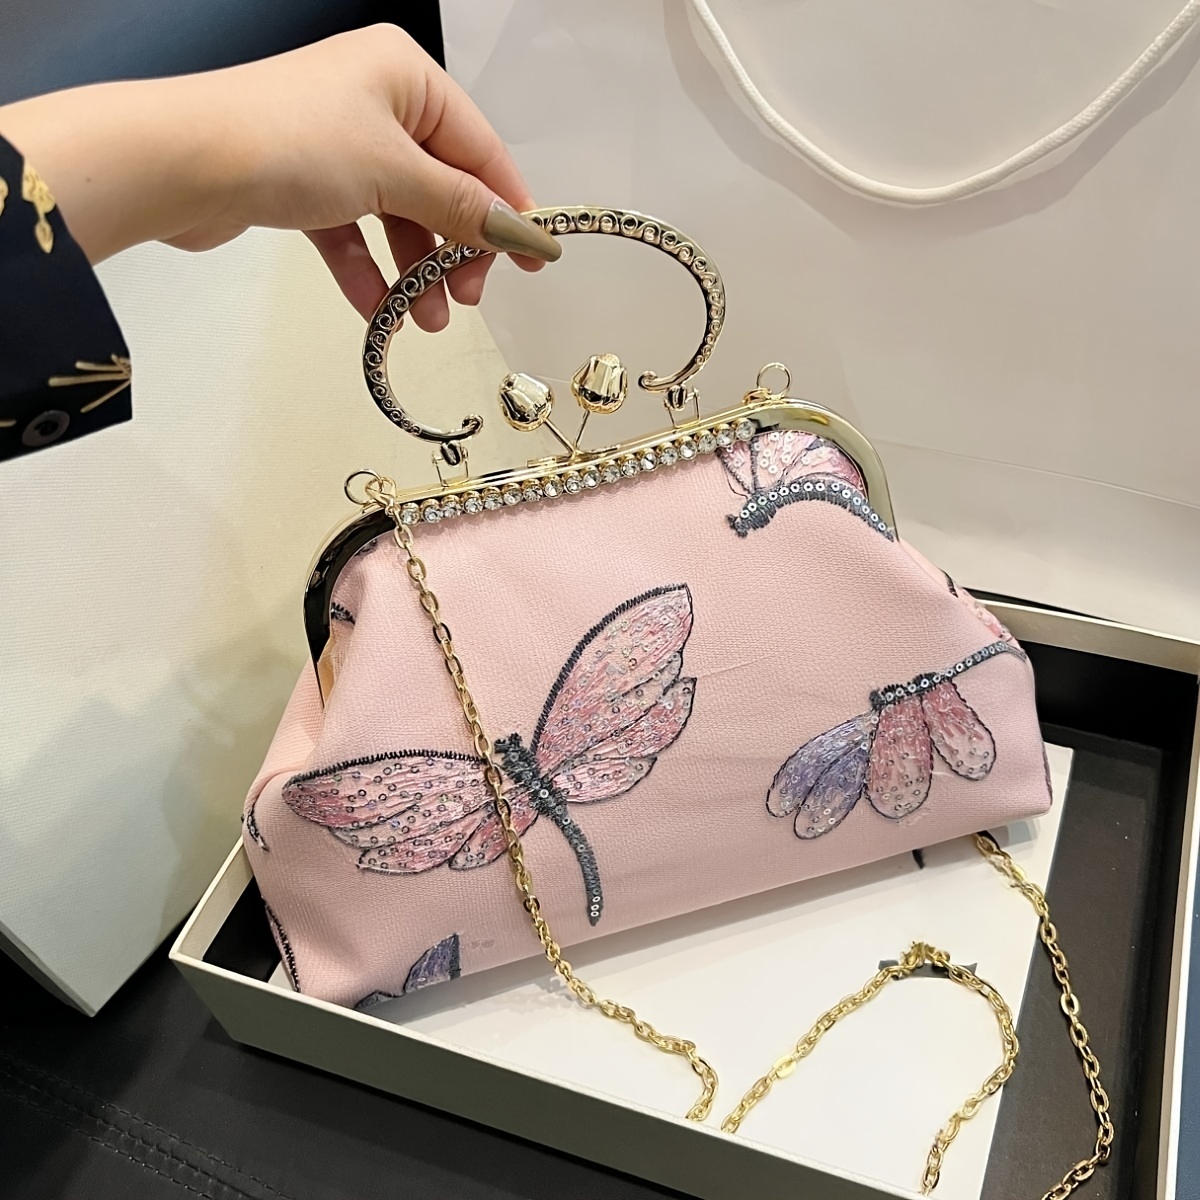 Gets Acrylic Purses and Handbags for Women Shell Shape Shoulder Crossbody  Bag with Chain Elegant Clutch Purse for Wedding Banquet Evening Party:  Handbags